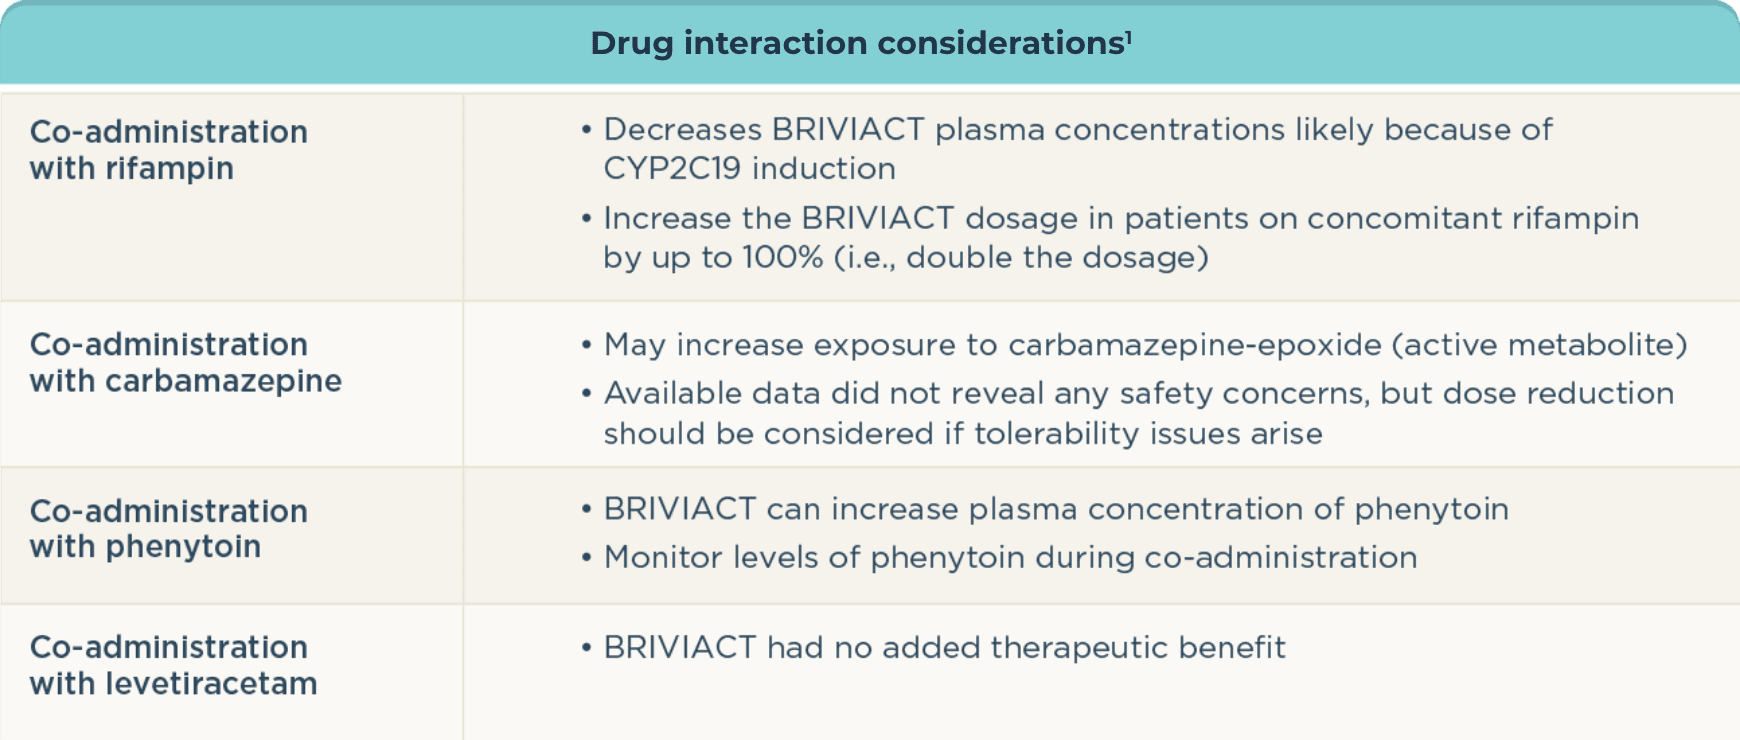 Drug interaction considerations